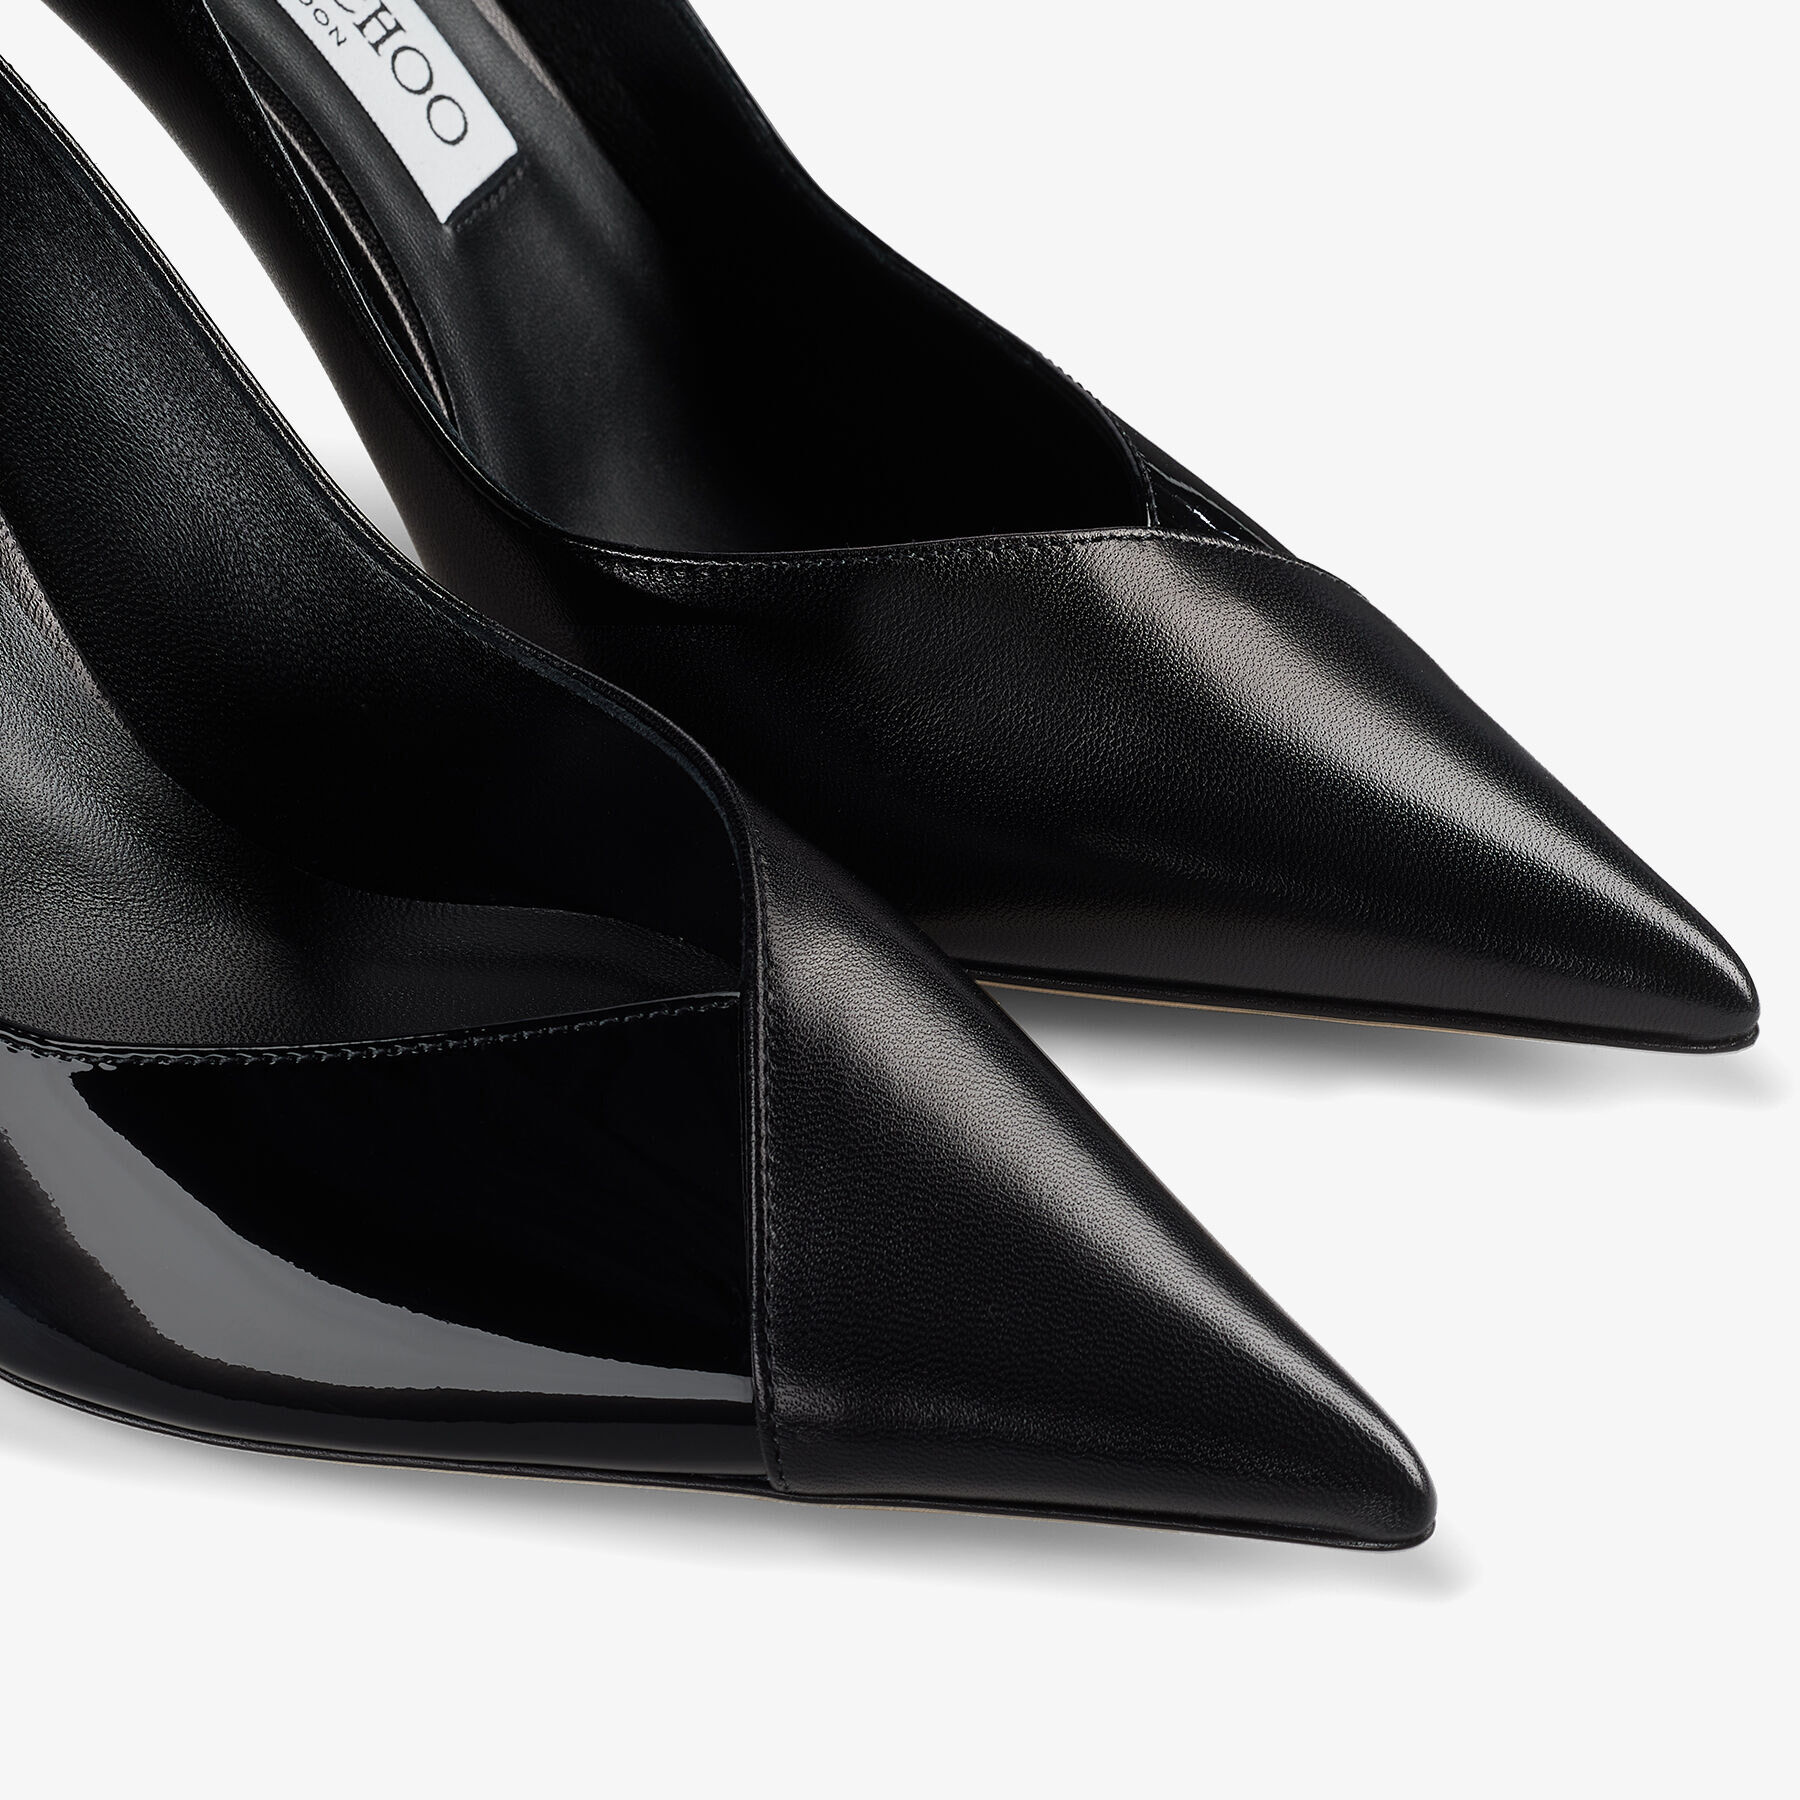 Black Nappa and Patent Leather Pumps | CASS 95 | Winter 2021 